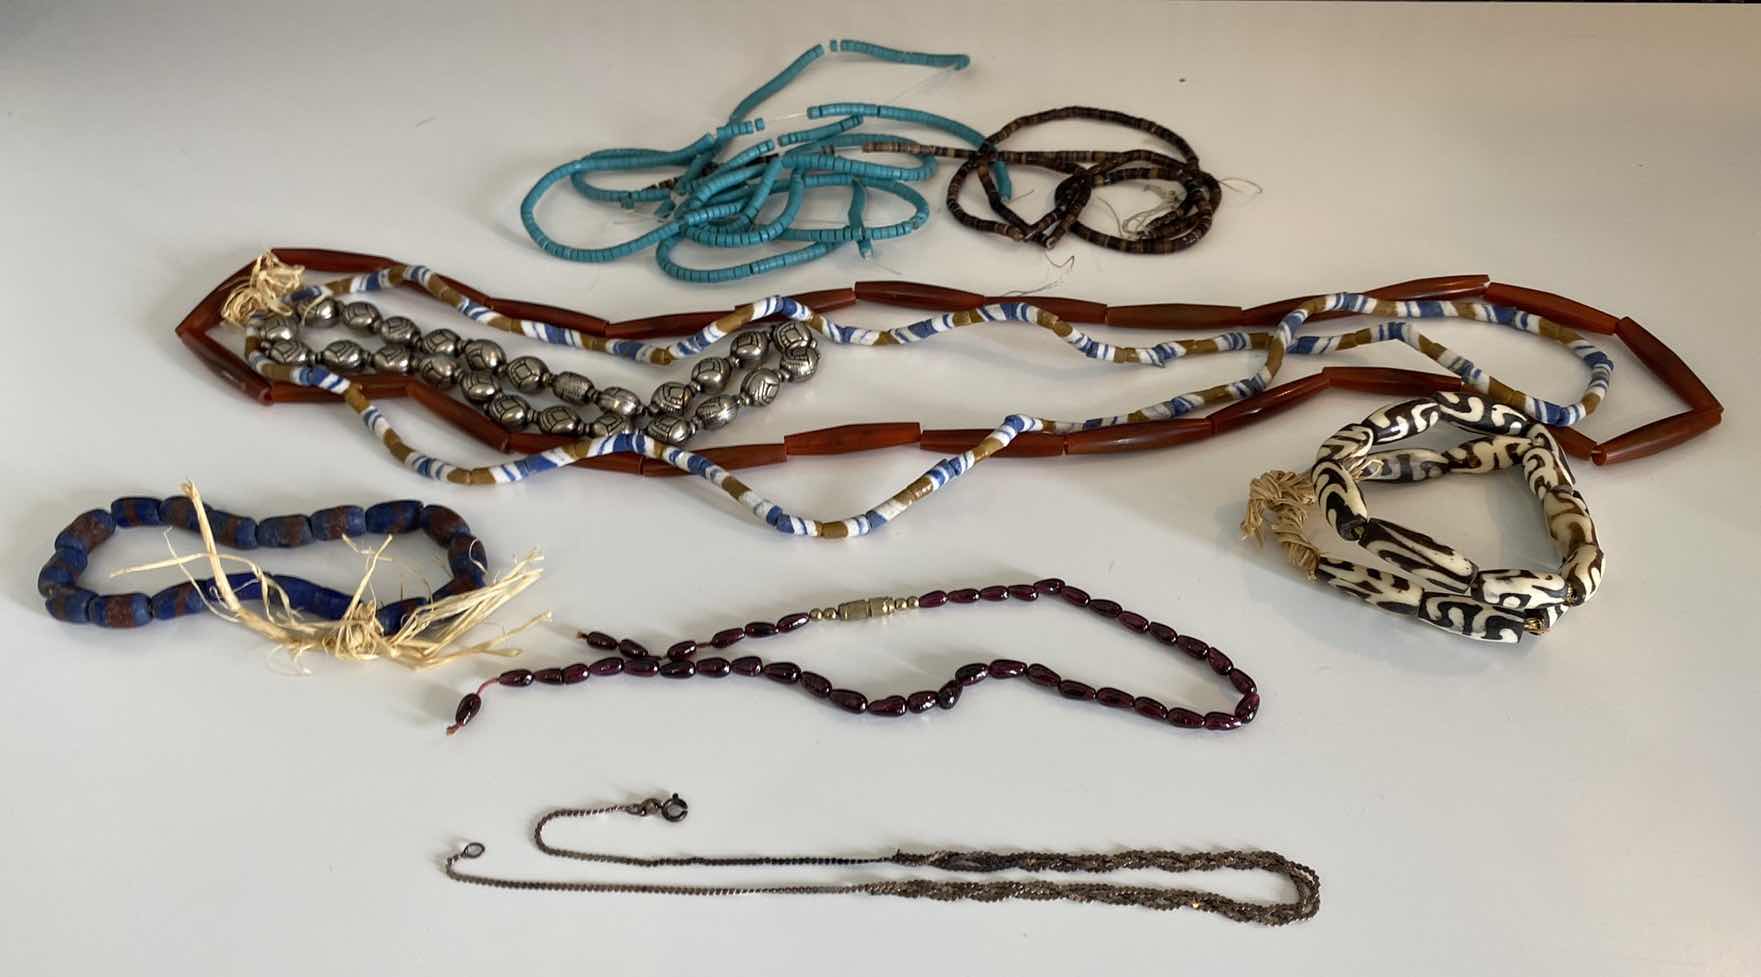 Photo 1 of JEWELRY MAKING SUPPLIES - BEADED AND SOME REQUIRE REPAIR